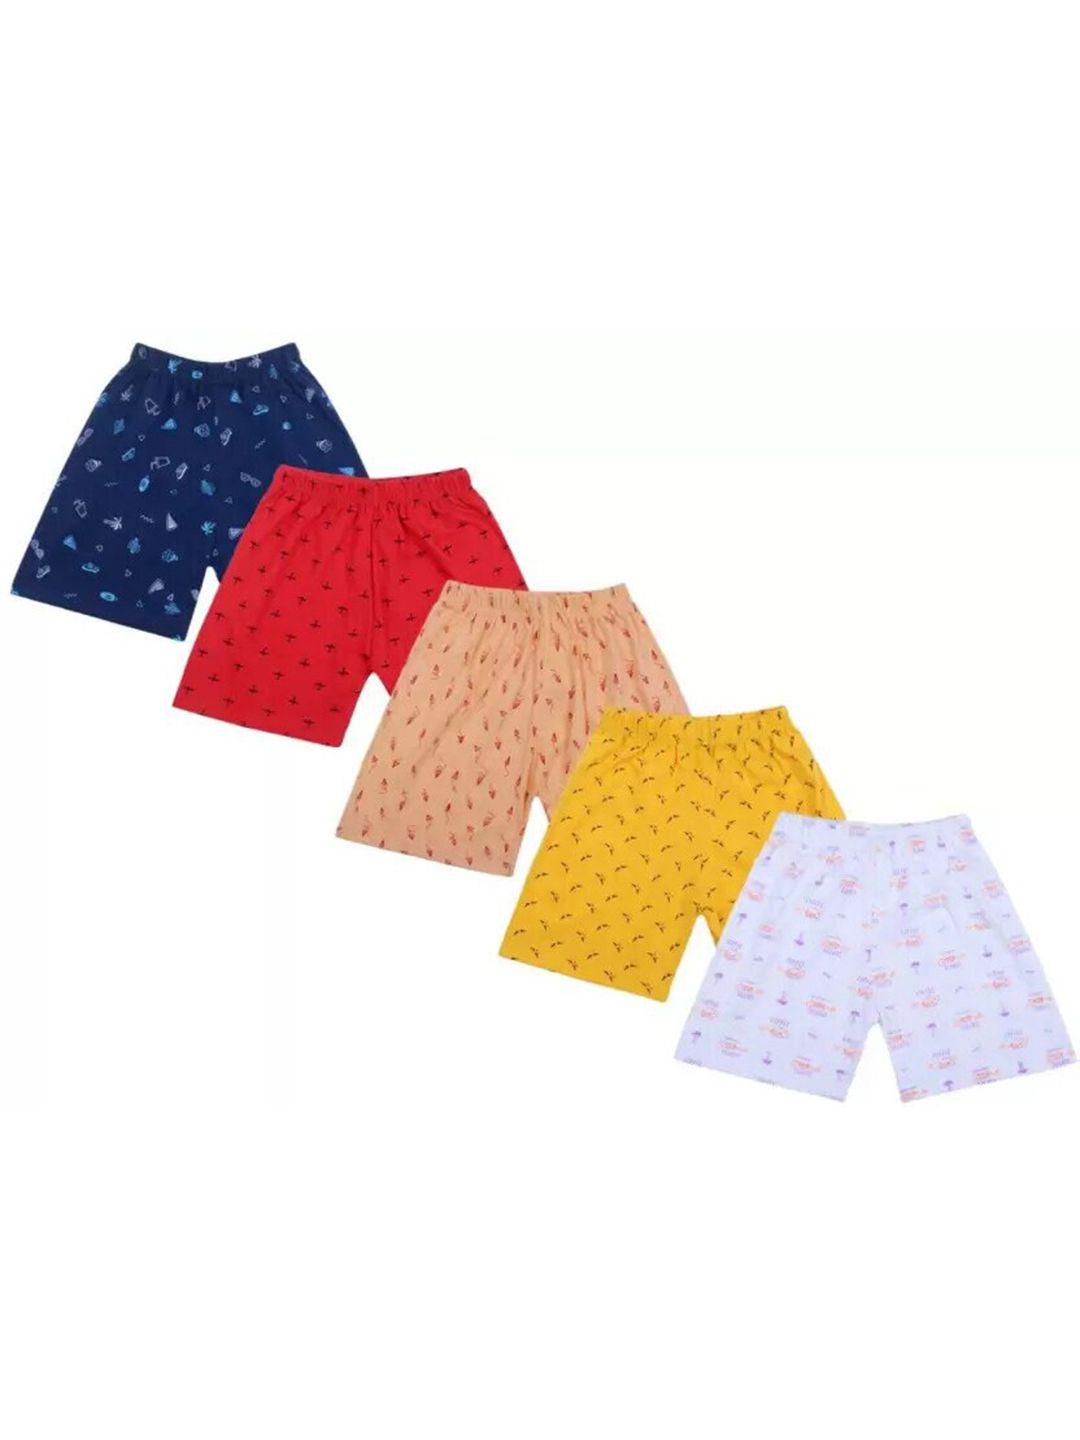 baesd kids pack of 5 assorted cotton shorts